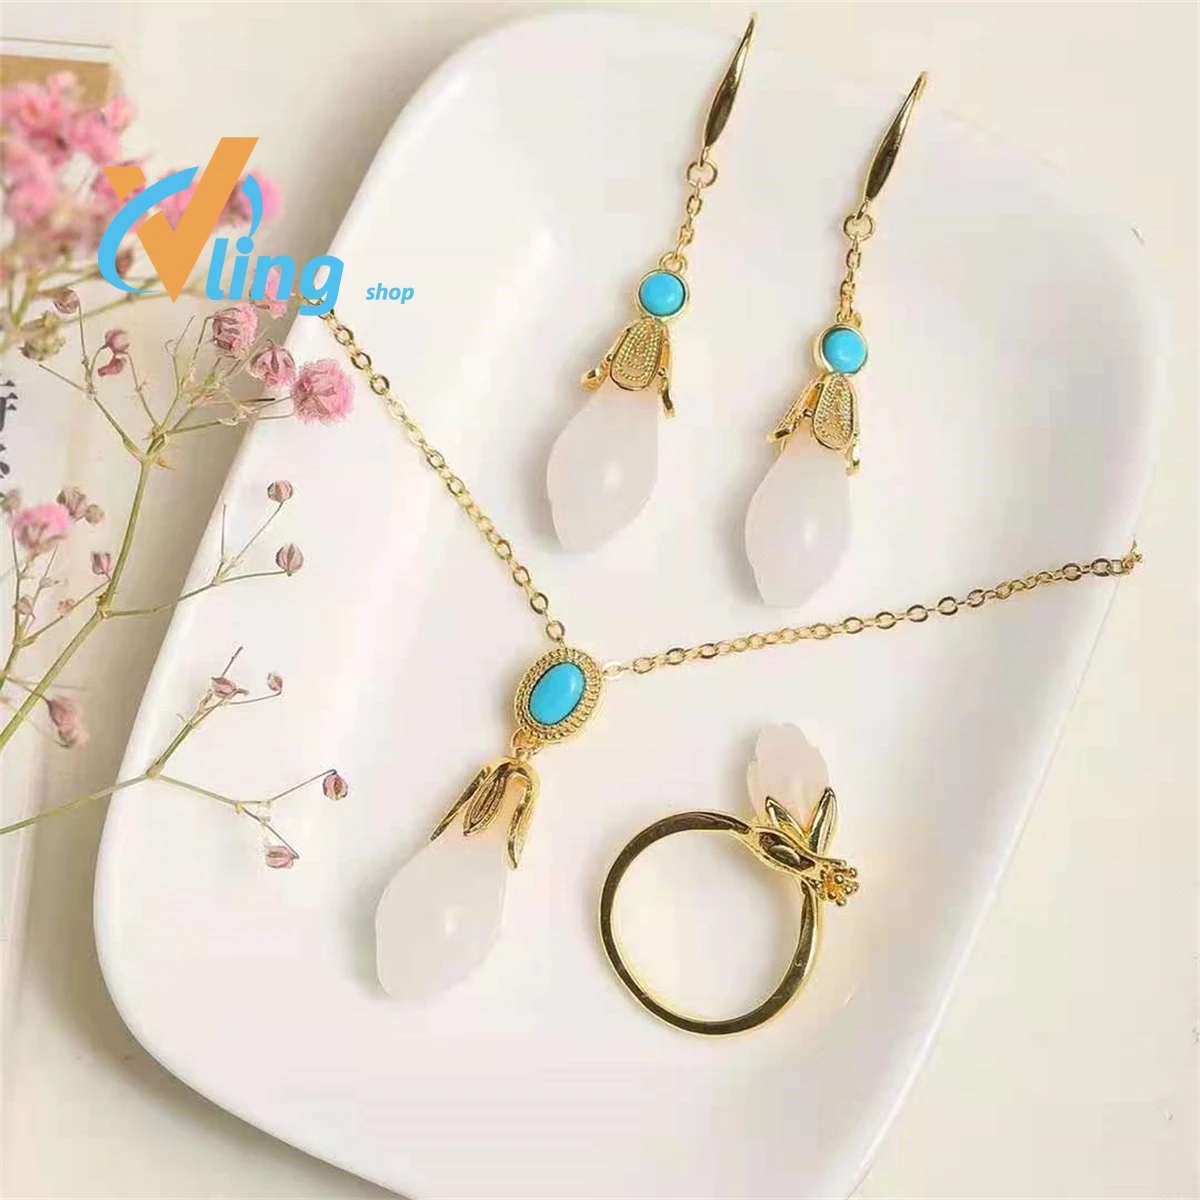 

Wholesale Inlaid Gold Wire Jade Orchid Set Of Rings Necklace Earrings Charm RetroThree Piece Set Of Antique JewelryFashion Gift